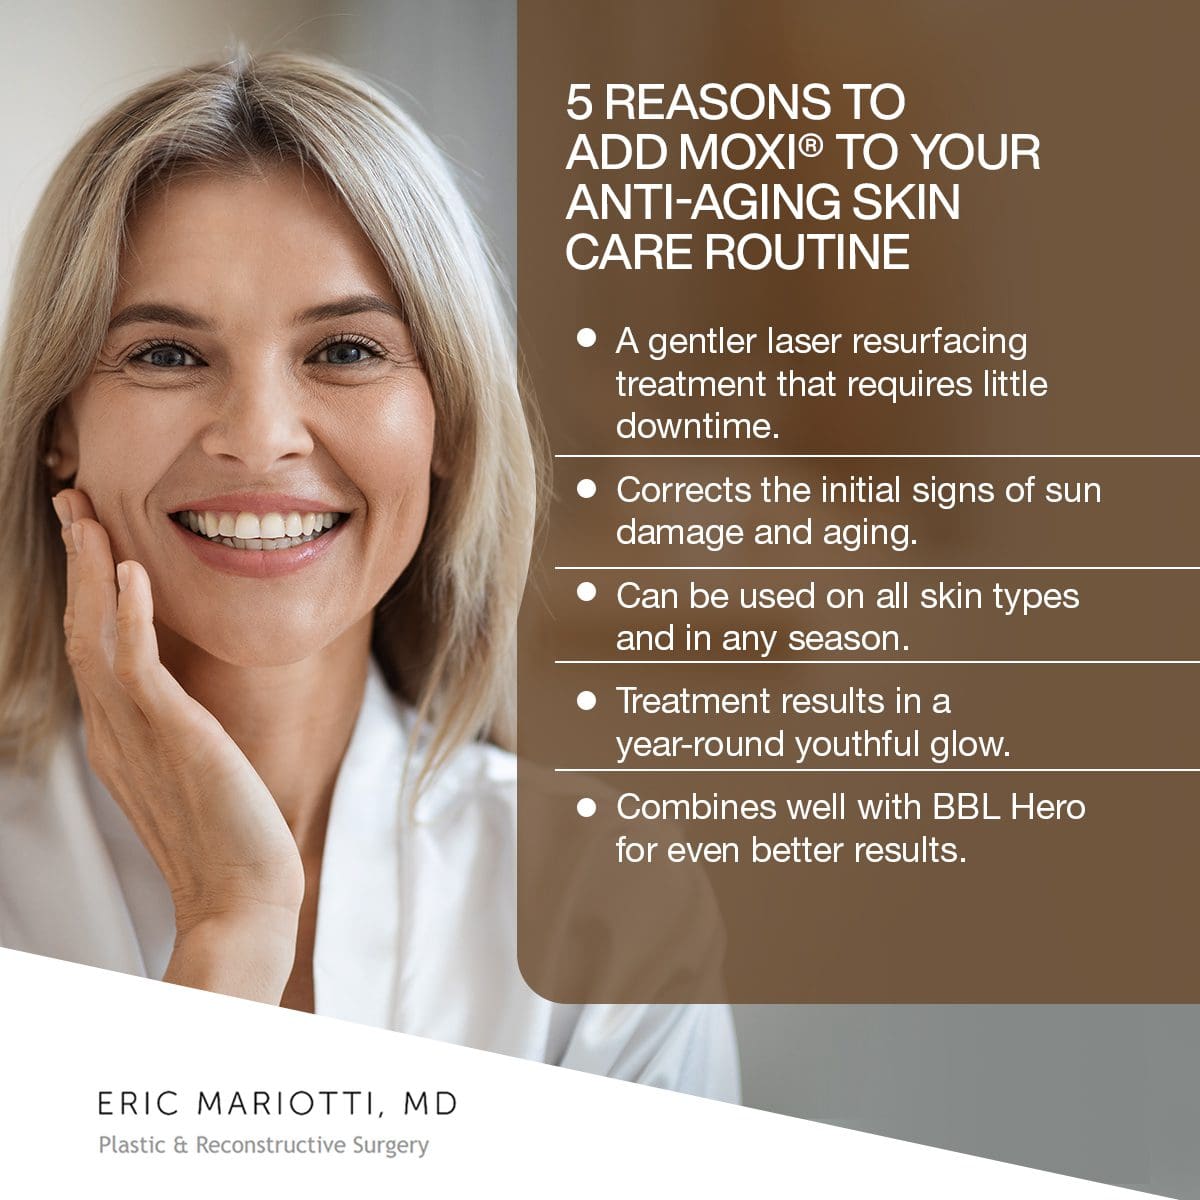 5 Reasons to Add MOXI® to Your Anti-Aging Skin Care Routine [Infographic]